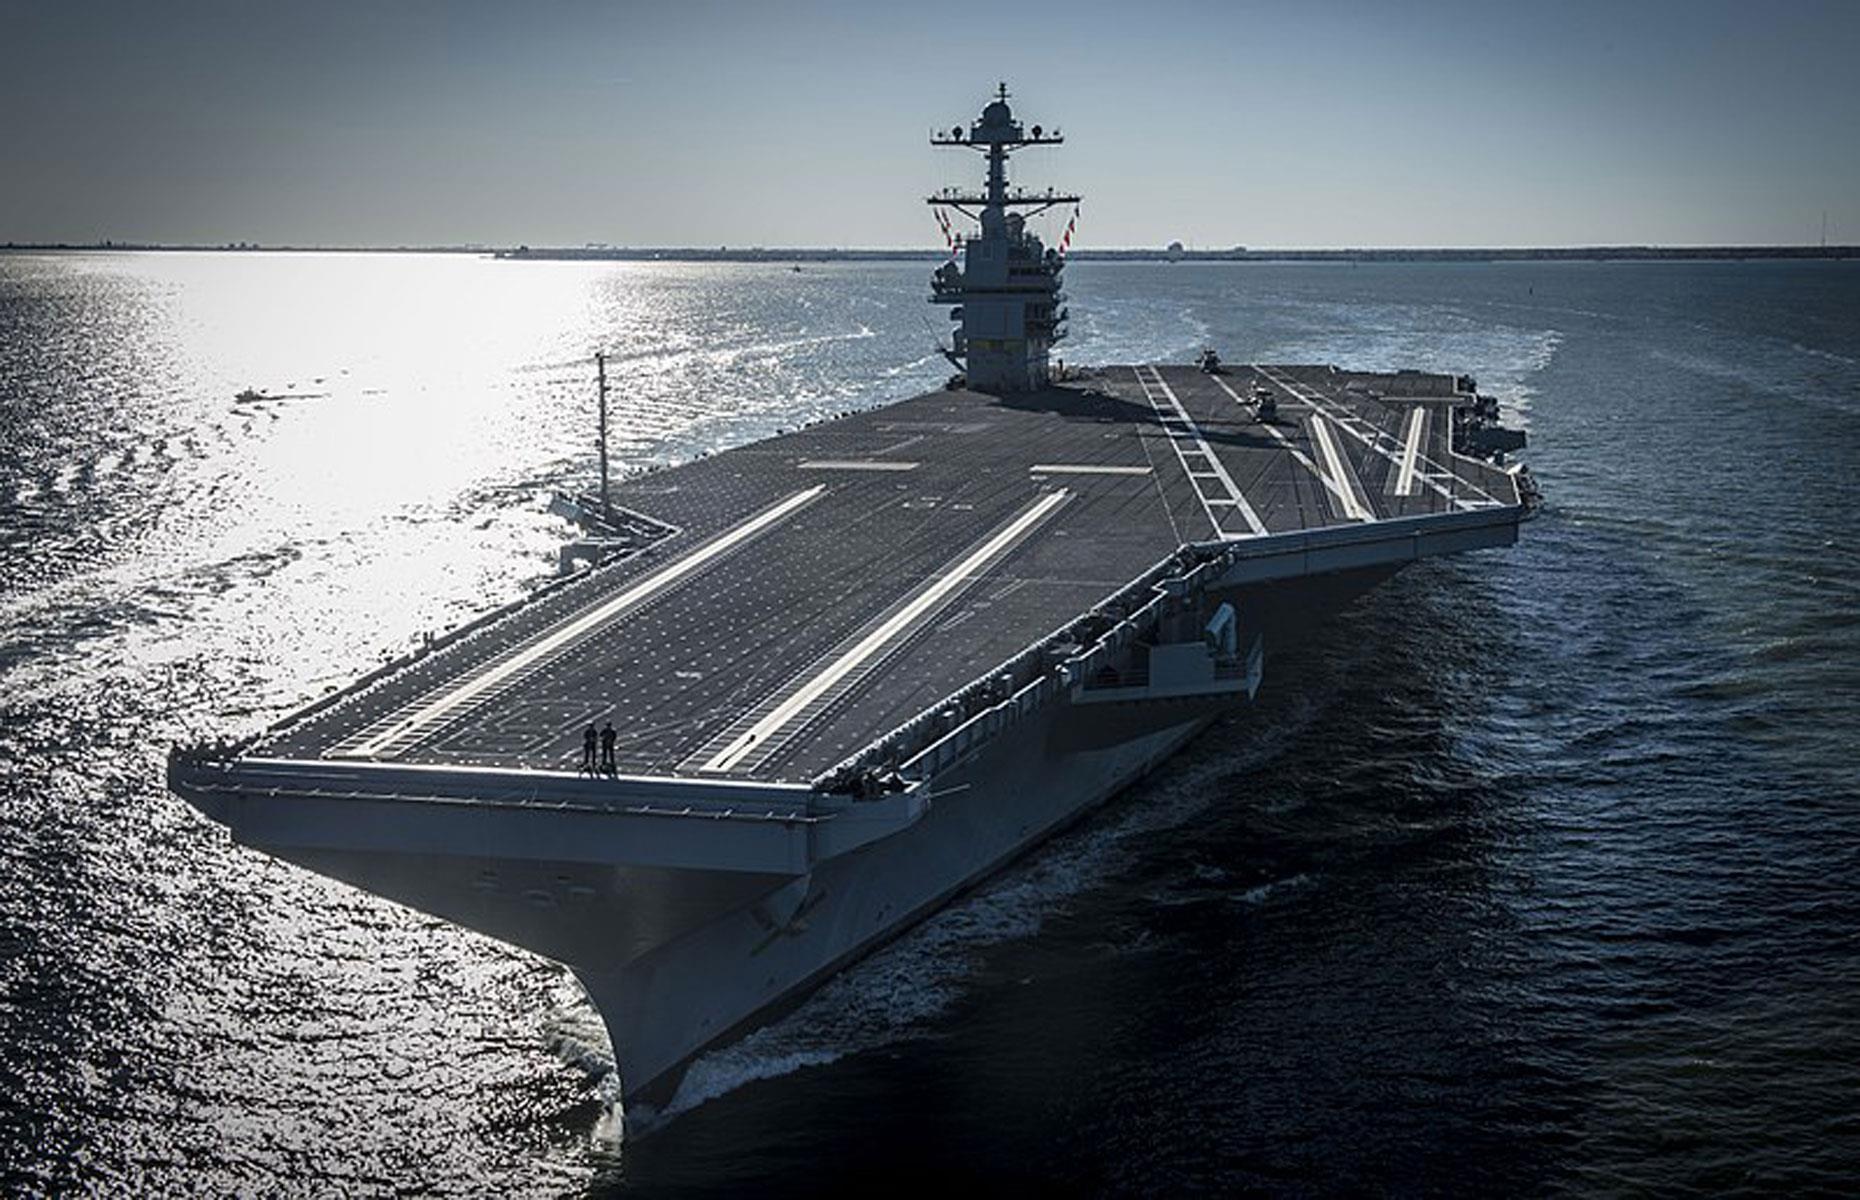 The US Navy has aircraft carriers, destroyers, and more